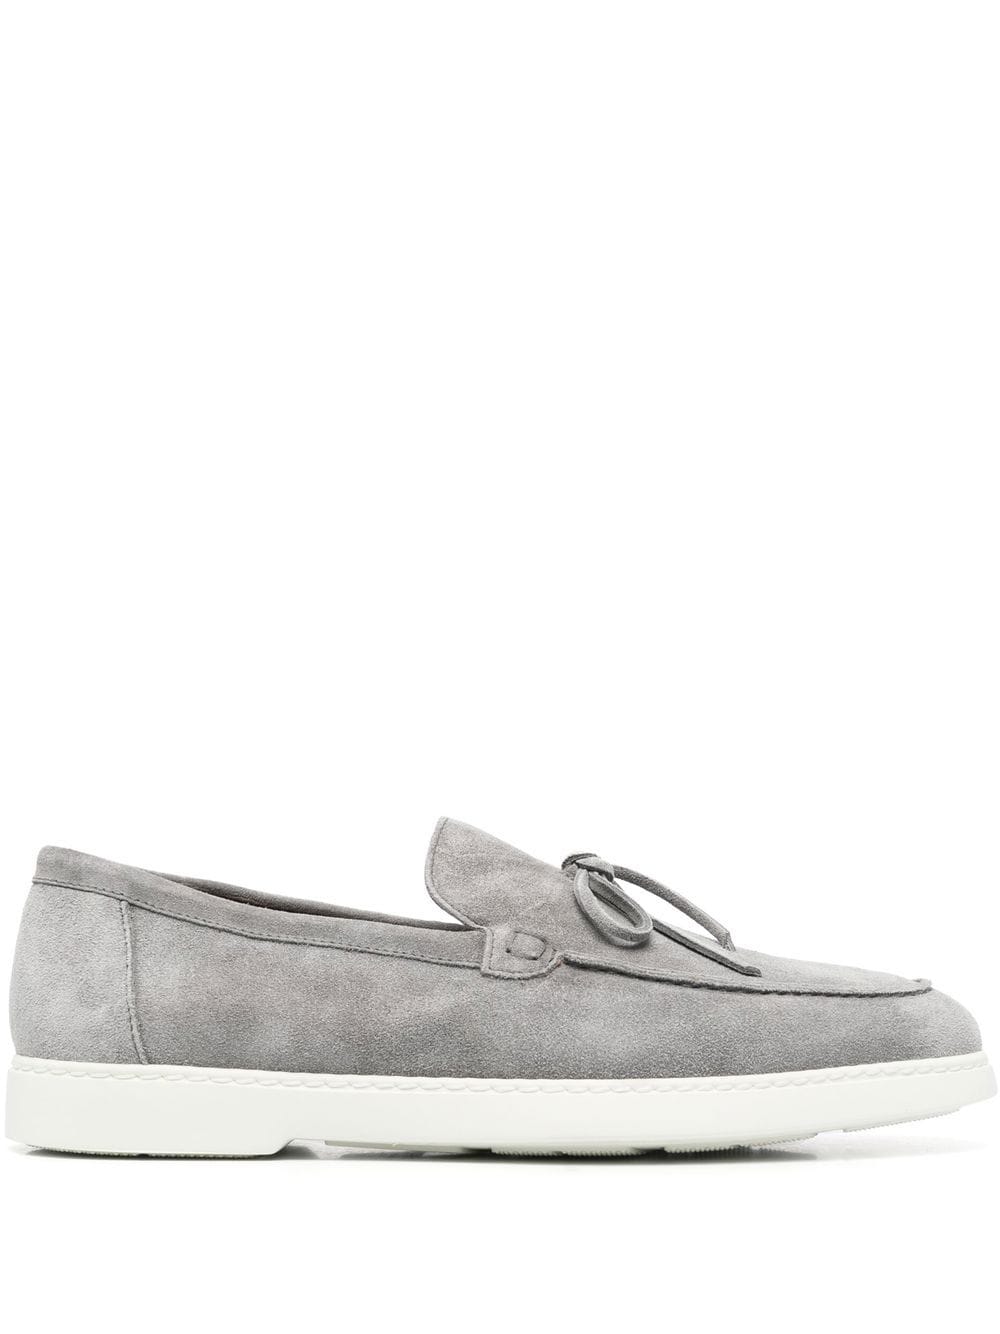 Doucal's lace-up suede loafers - Grey von Doucal's